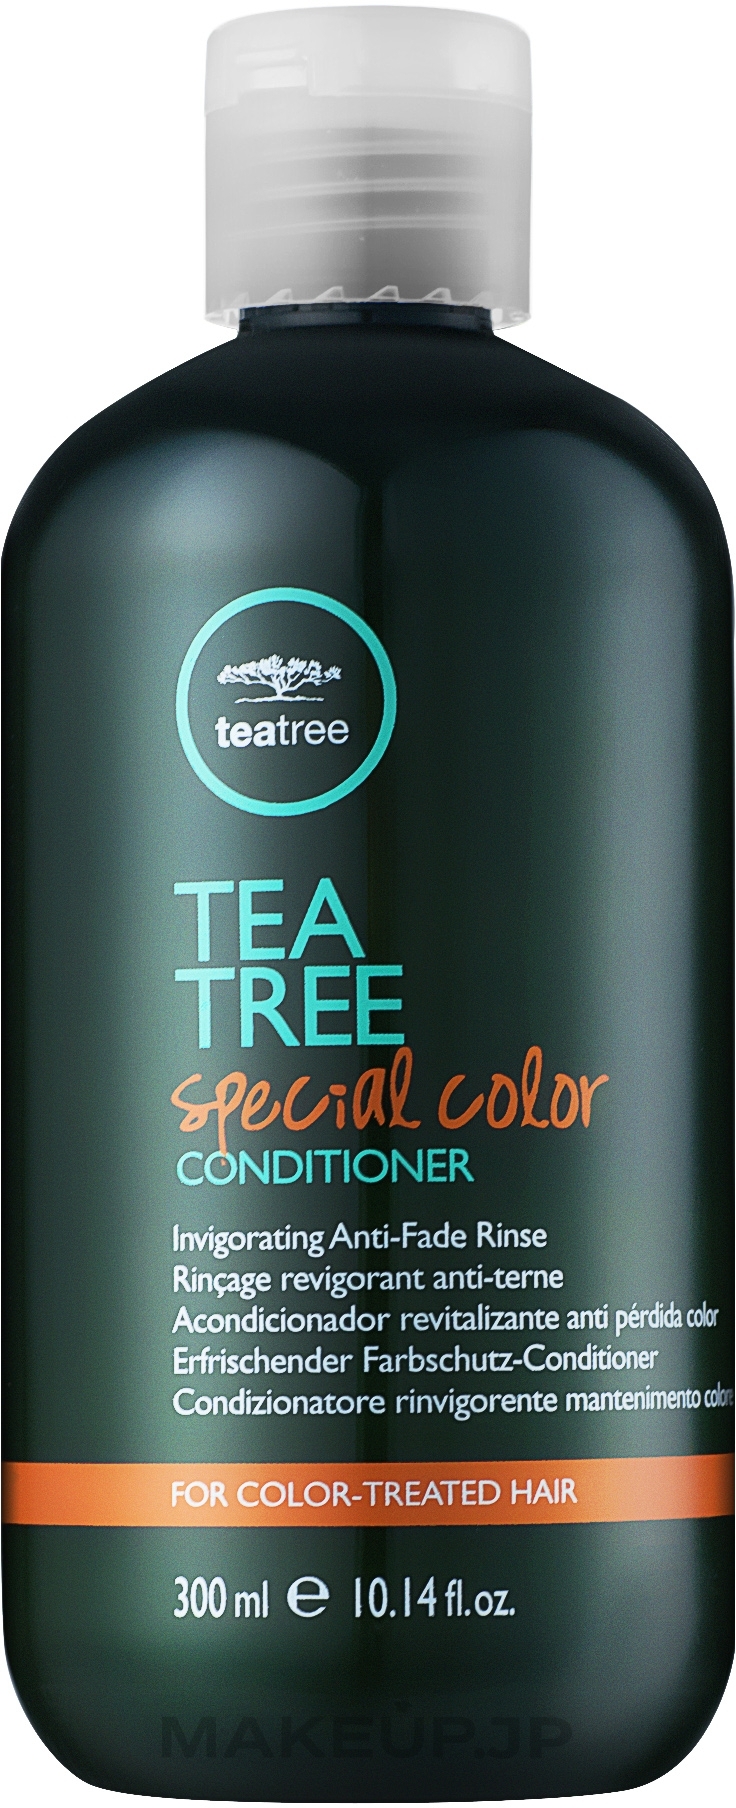 Conditioner for Colored Hair - Paul Mitchell Tea Tree Special Color Conditioner — photo 300 ml